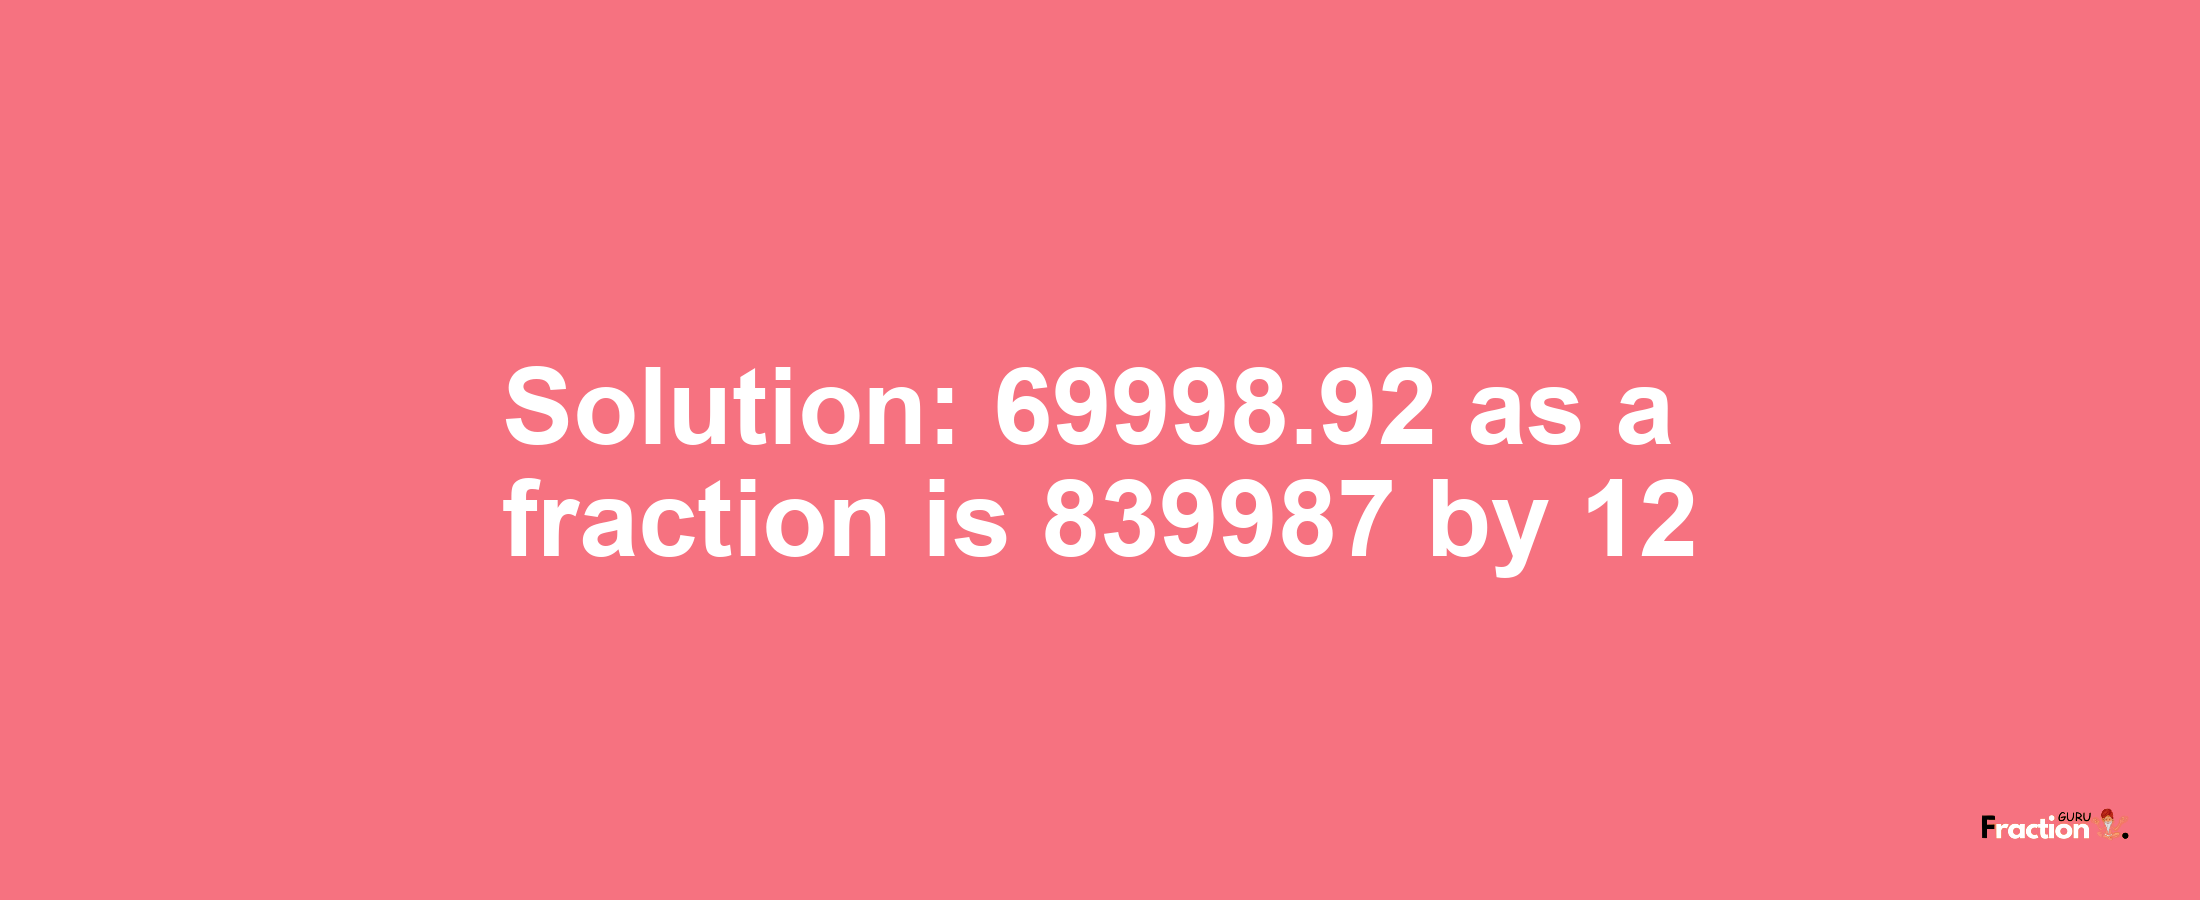 Solution:69998.92 as a fraction is 839987/12